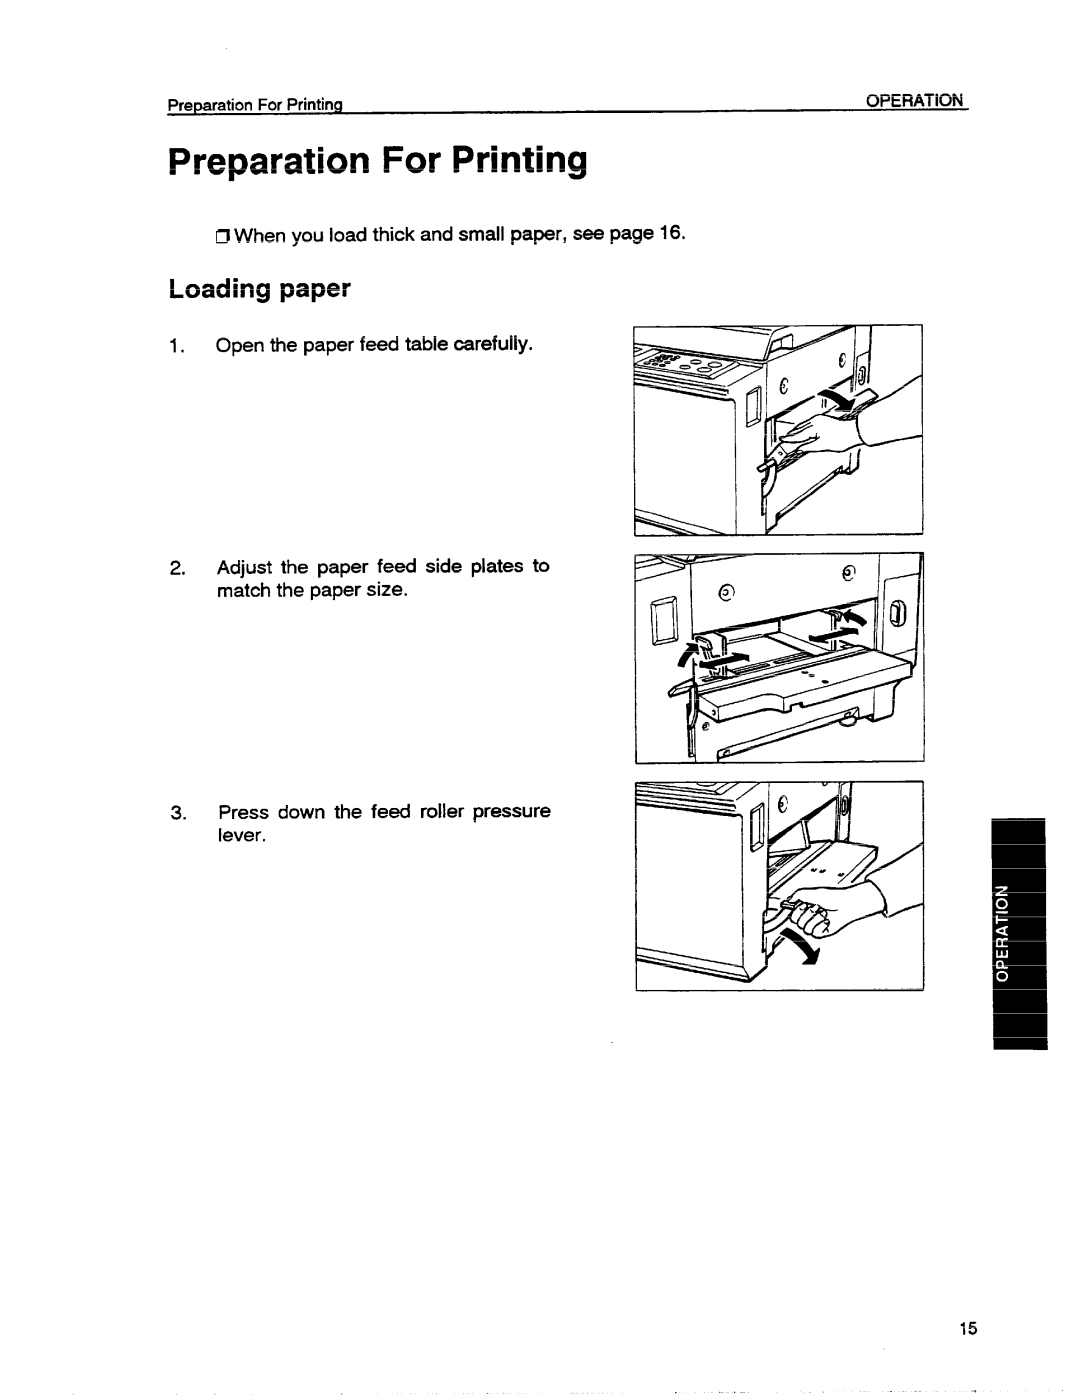 Ricoh VT1730 manual Preparation For Printing, Loading paper, Operation 